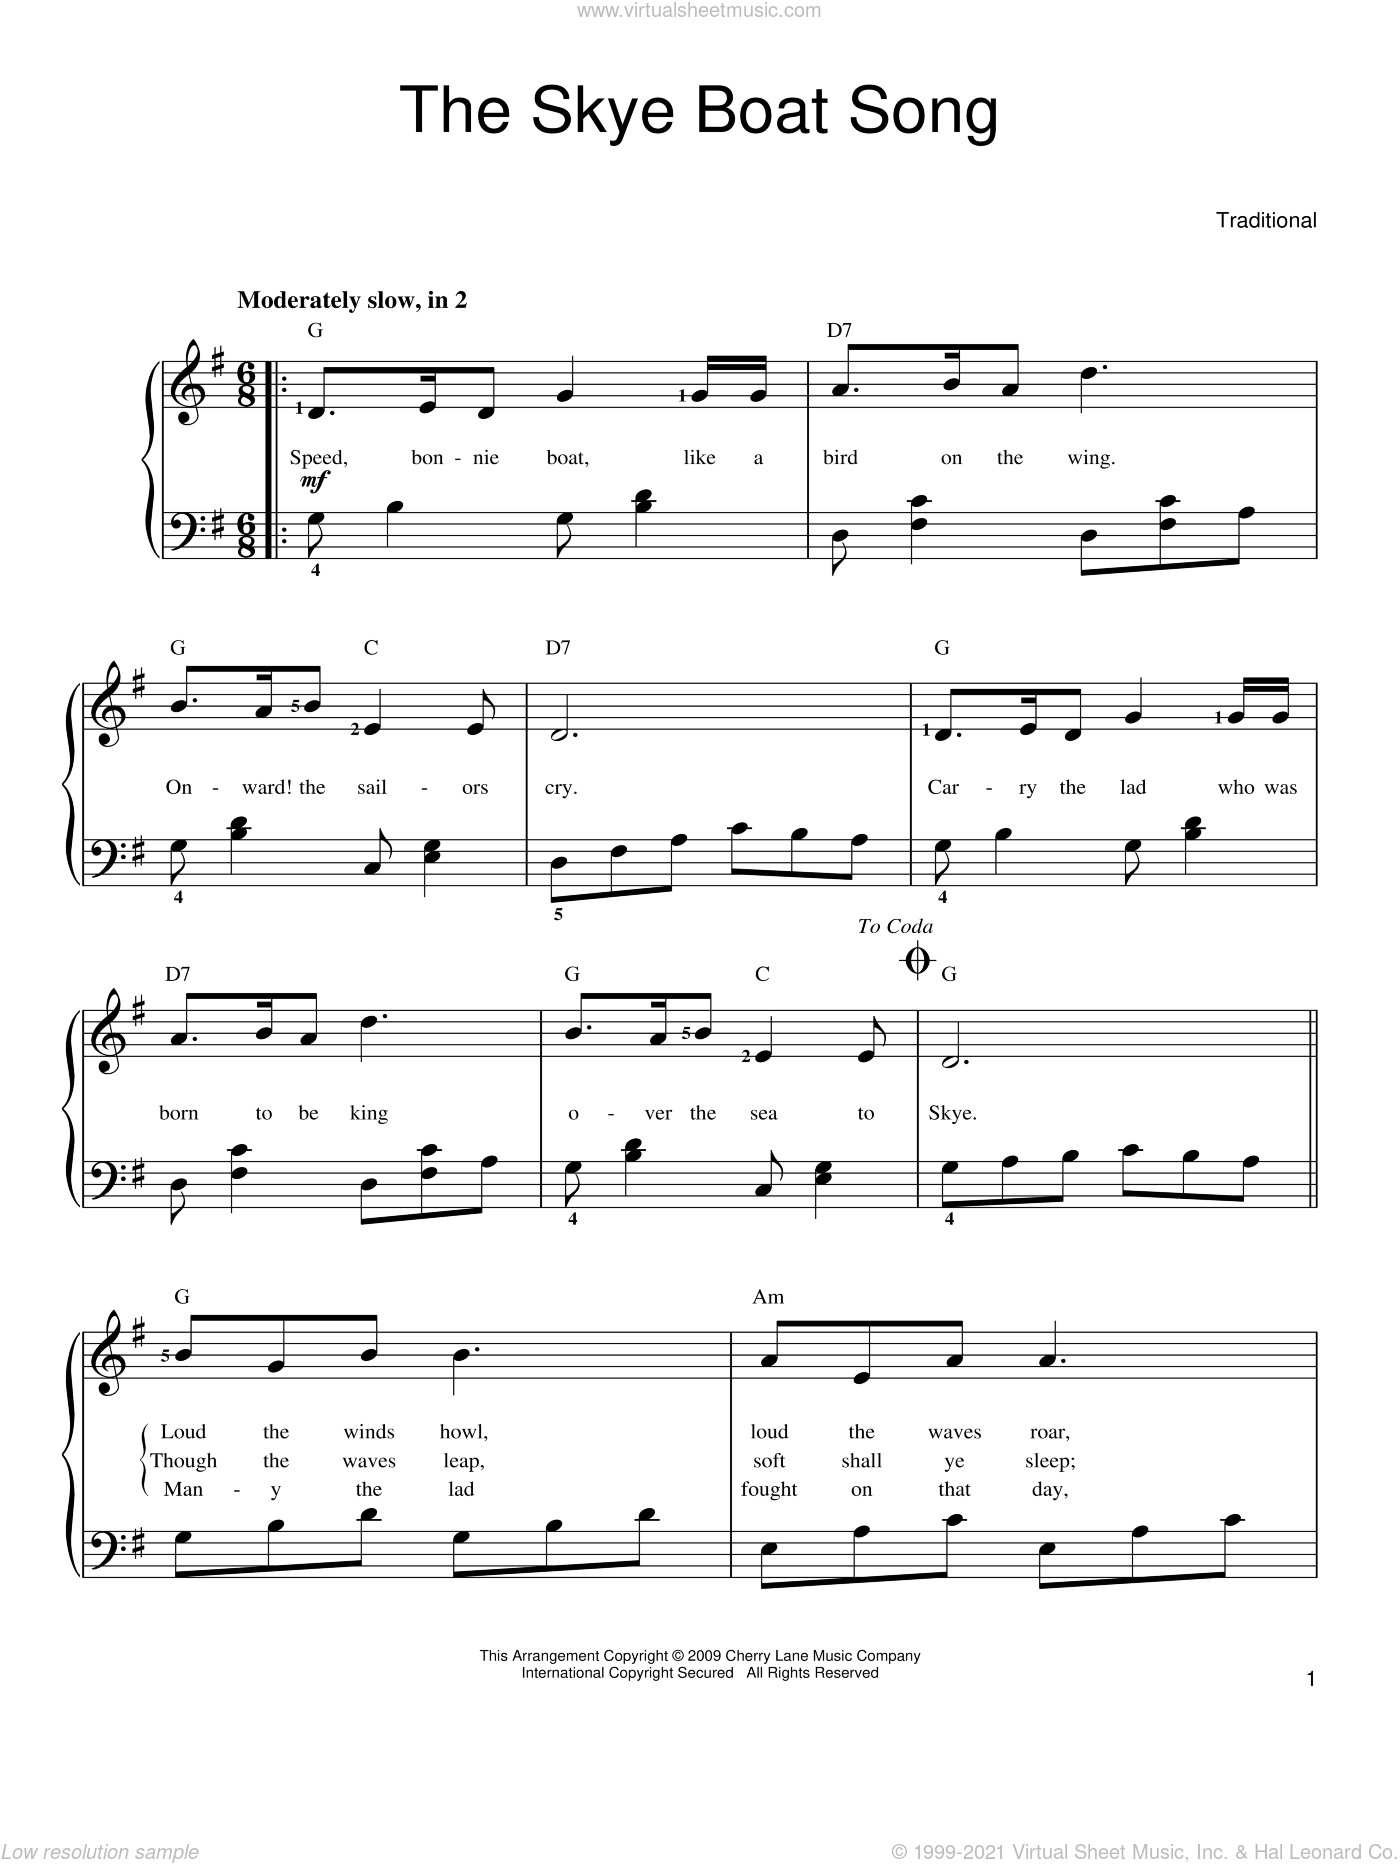 The Skye Boat Song (easy) sheet music for piano solo (PDF)